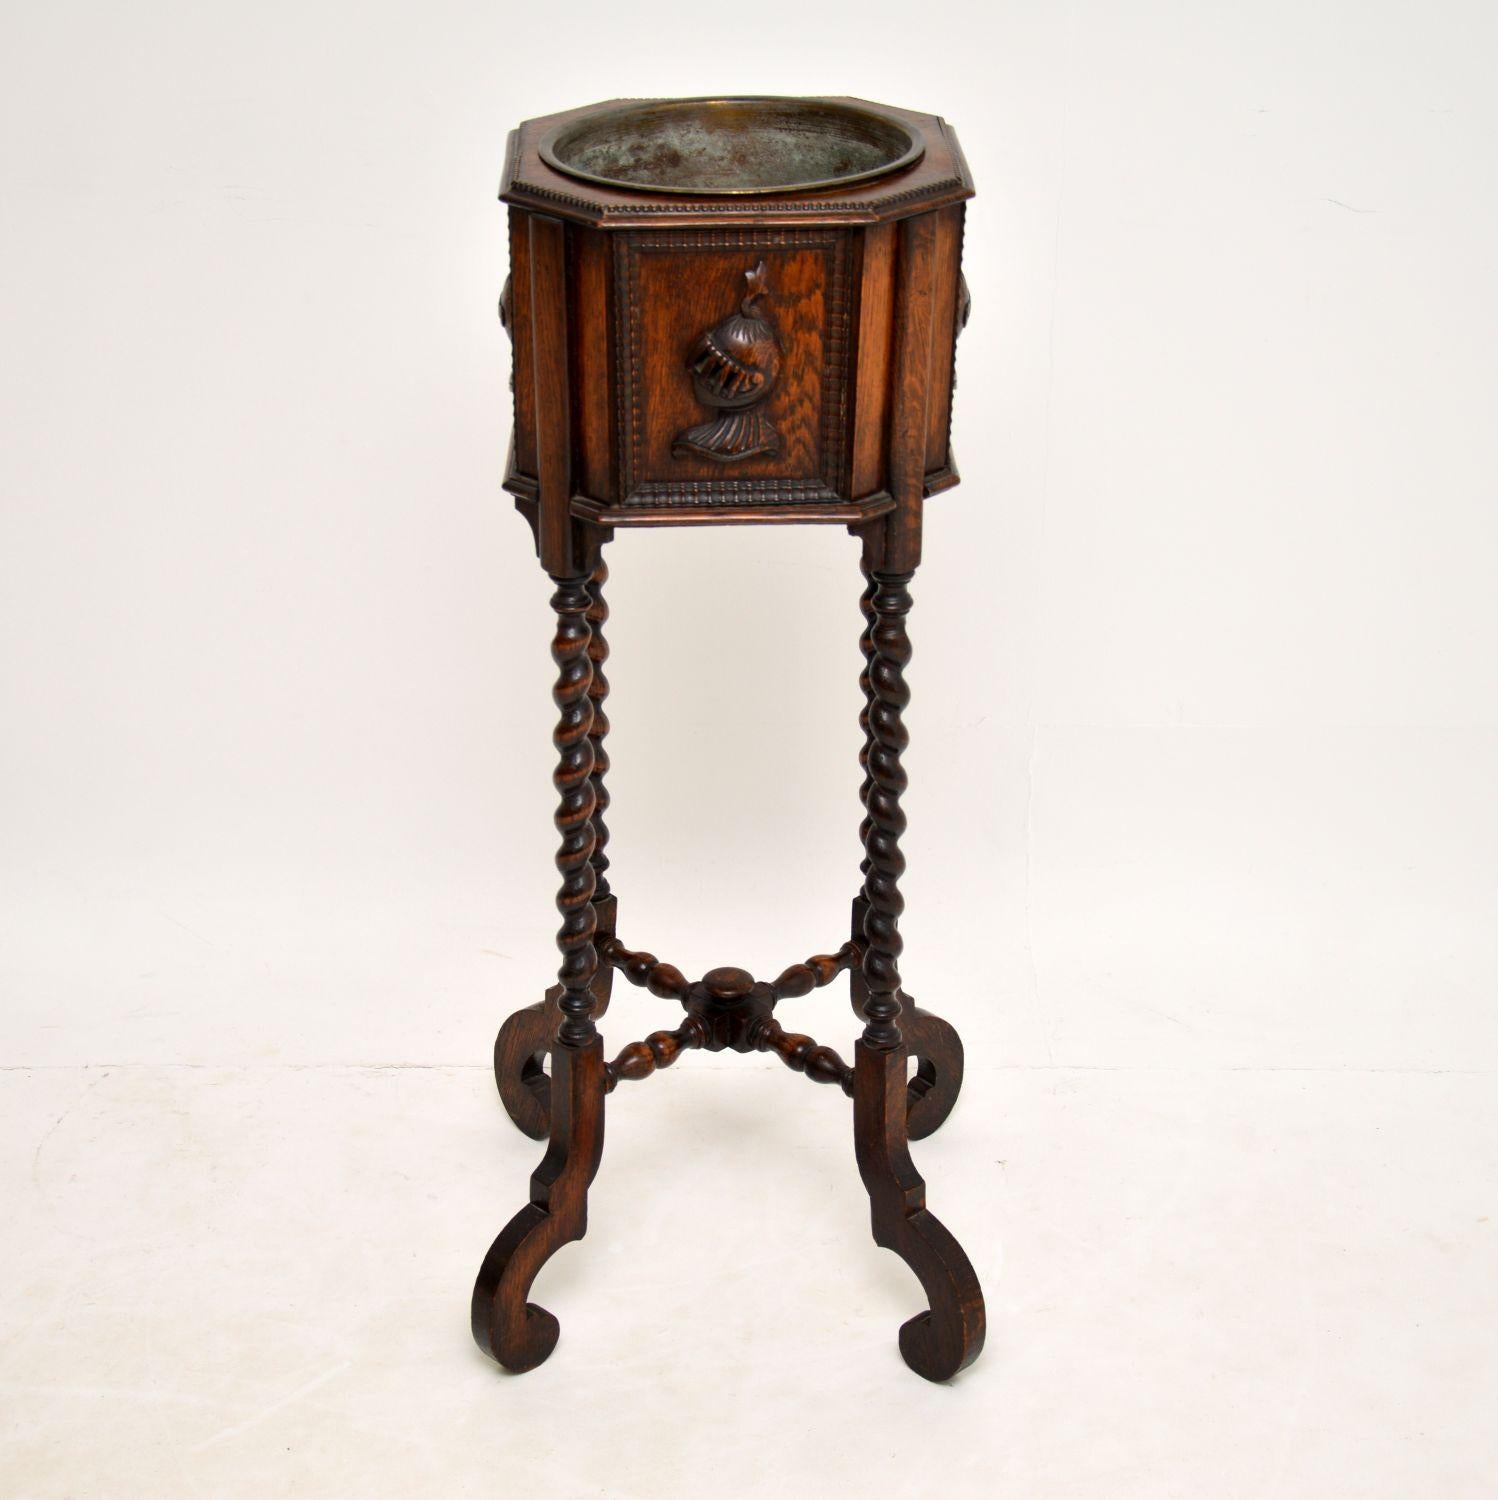 A beautifully carved antique plant stand in solid oak. This was made in England & dates from around the 1880-1890 period.

The quality is amazing, with impressive barley twist legs and carved knights head motifs on the sides. There is the original